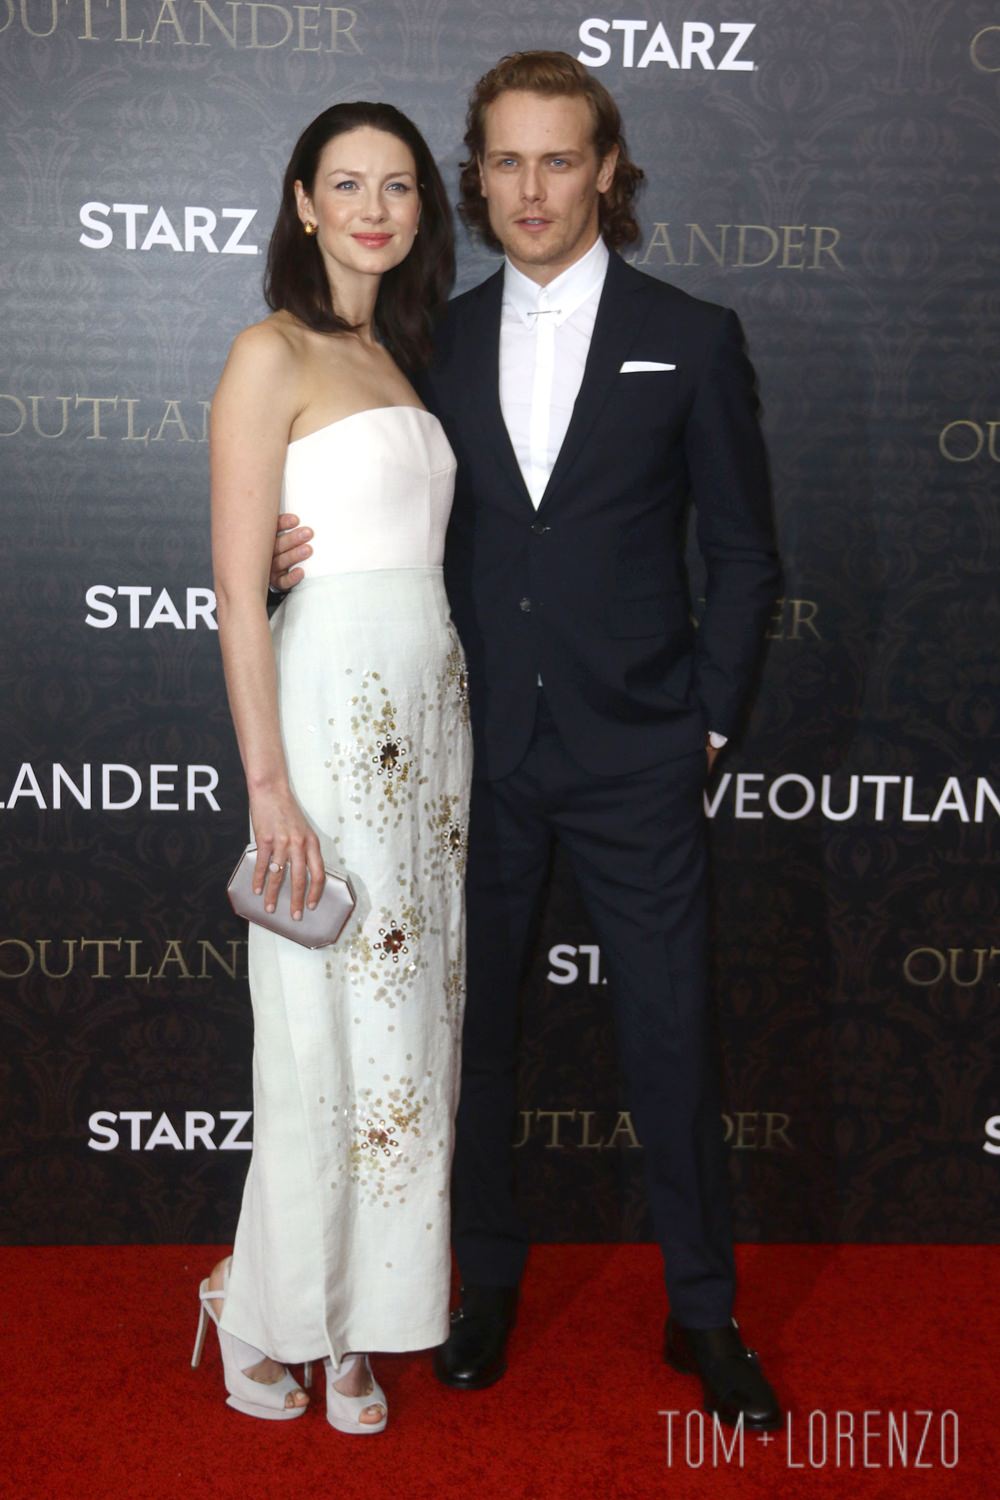 Caitriona Balfe And Sam Heughan At The Outlander New